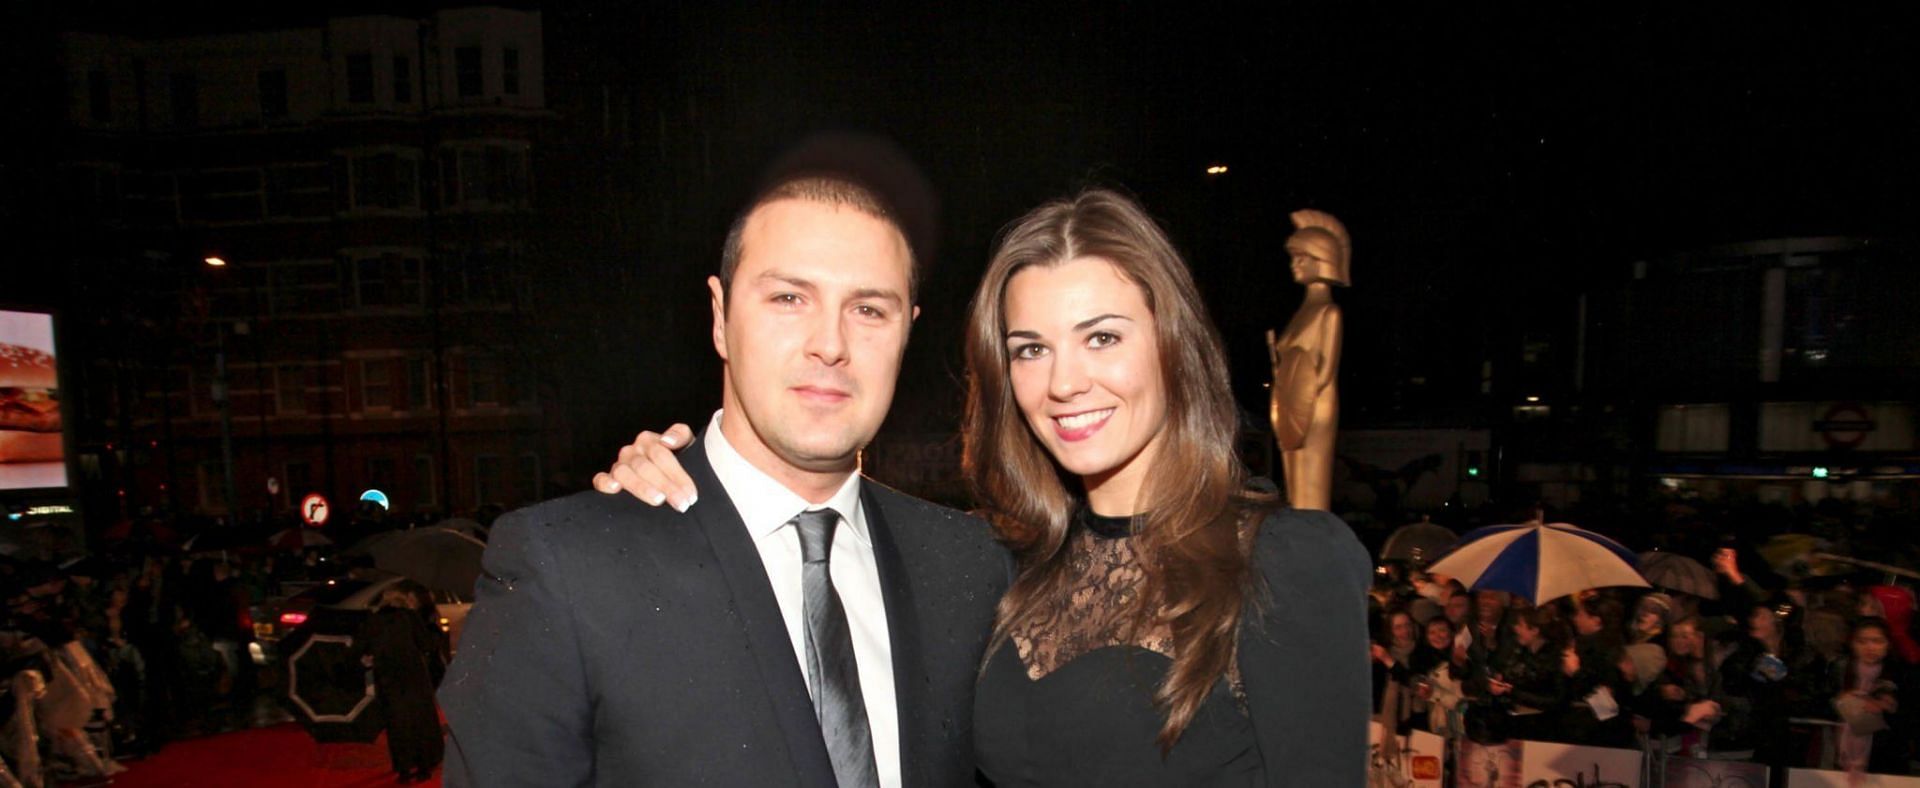 Christine and Paddy McGuinness tied the knot in June 2011 (Image via Getty Images)